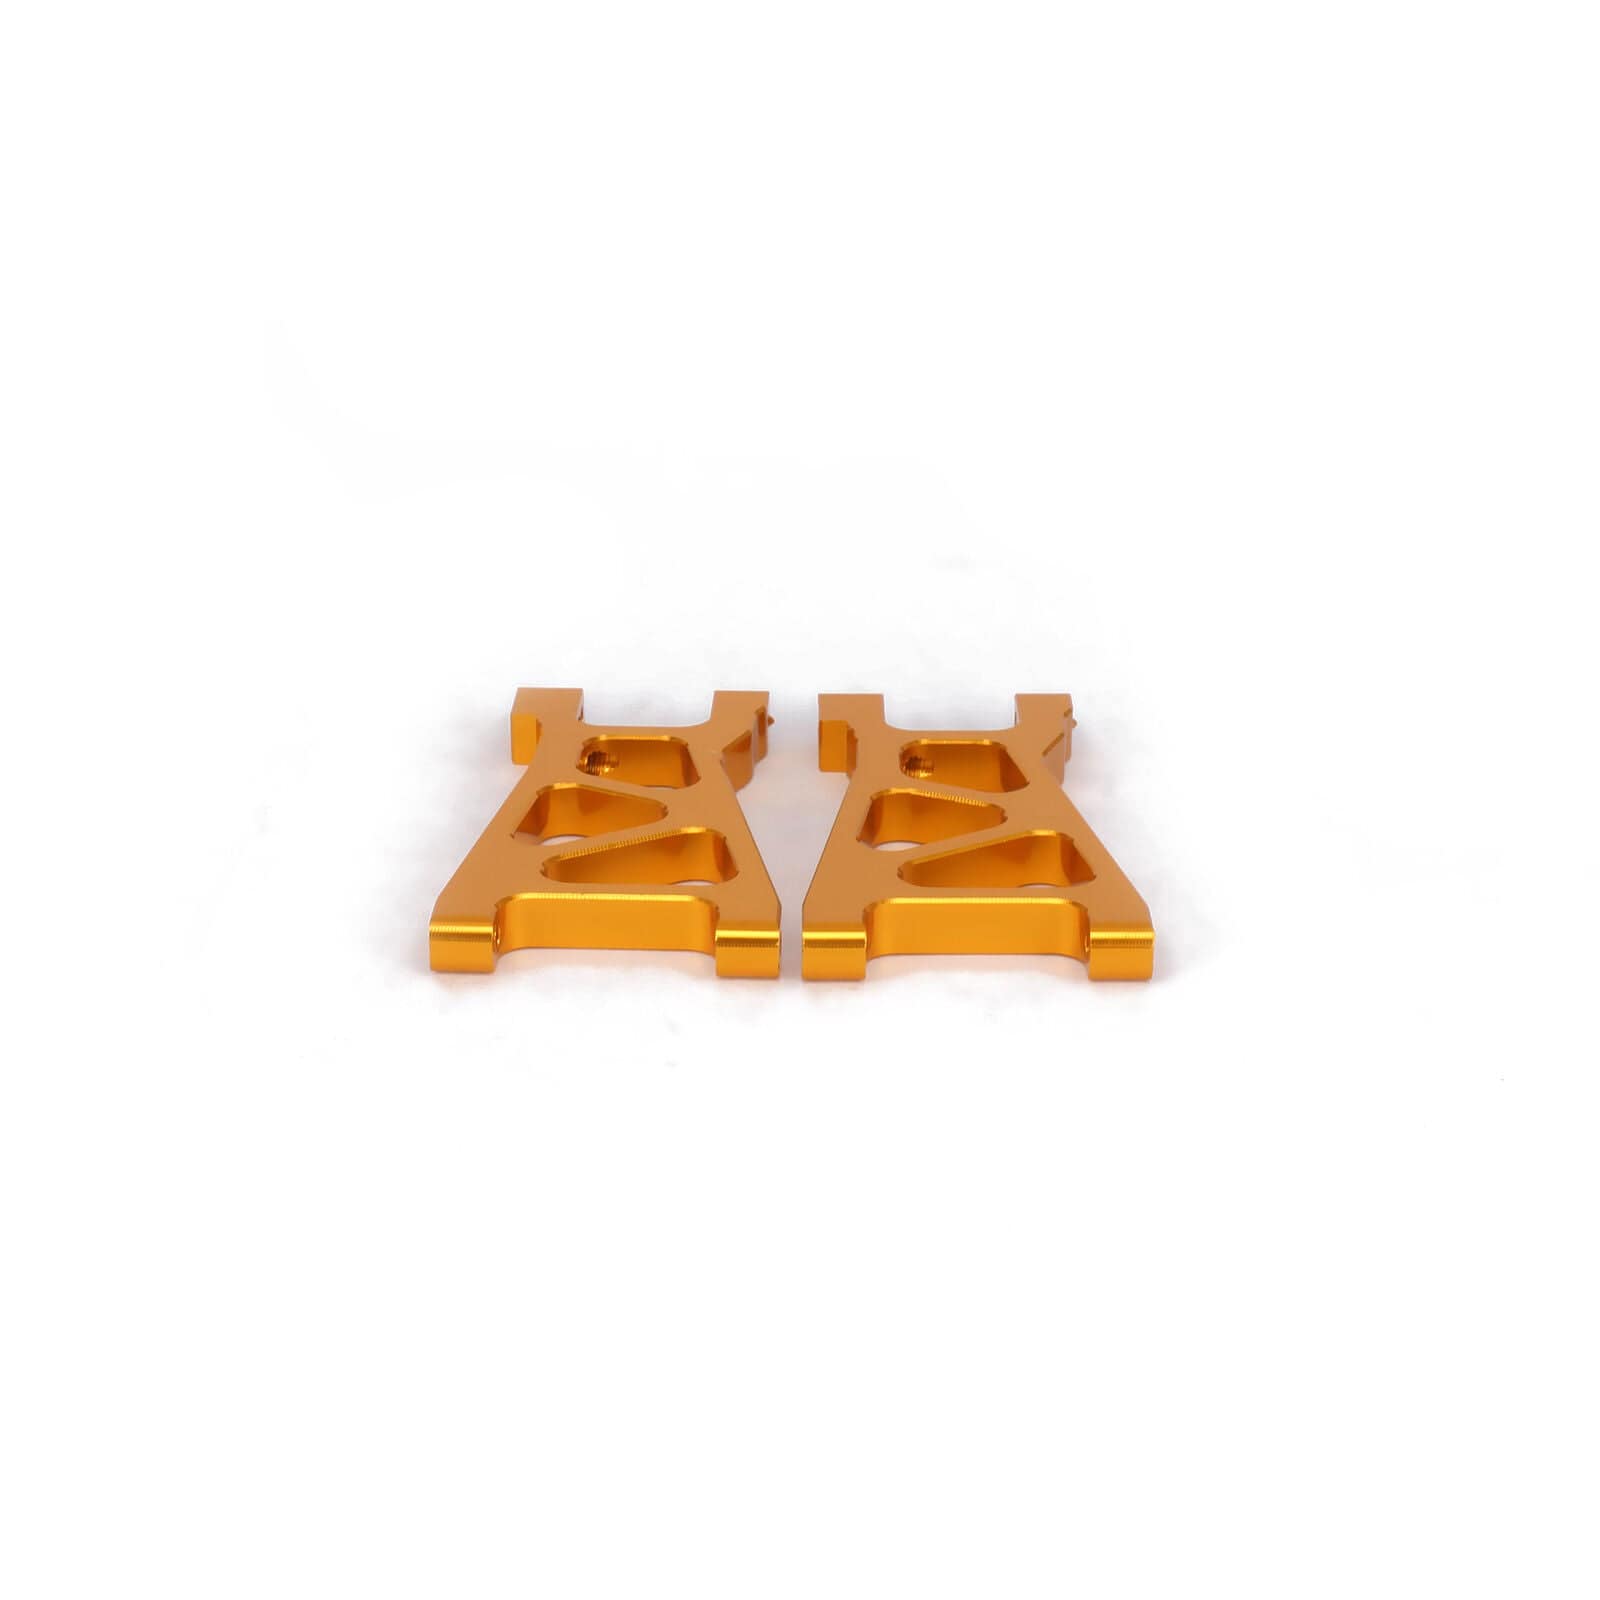 RCAWD HIMOTO UPGRADE PARTS RCAWD Alloy Rear Lower Suspension Arm M606 23606 For RC Car 1/18 Himoto E18 2pcs